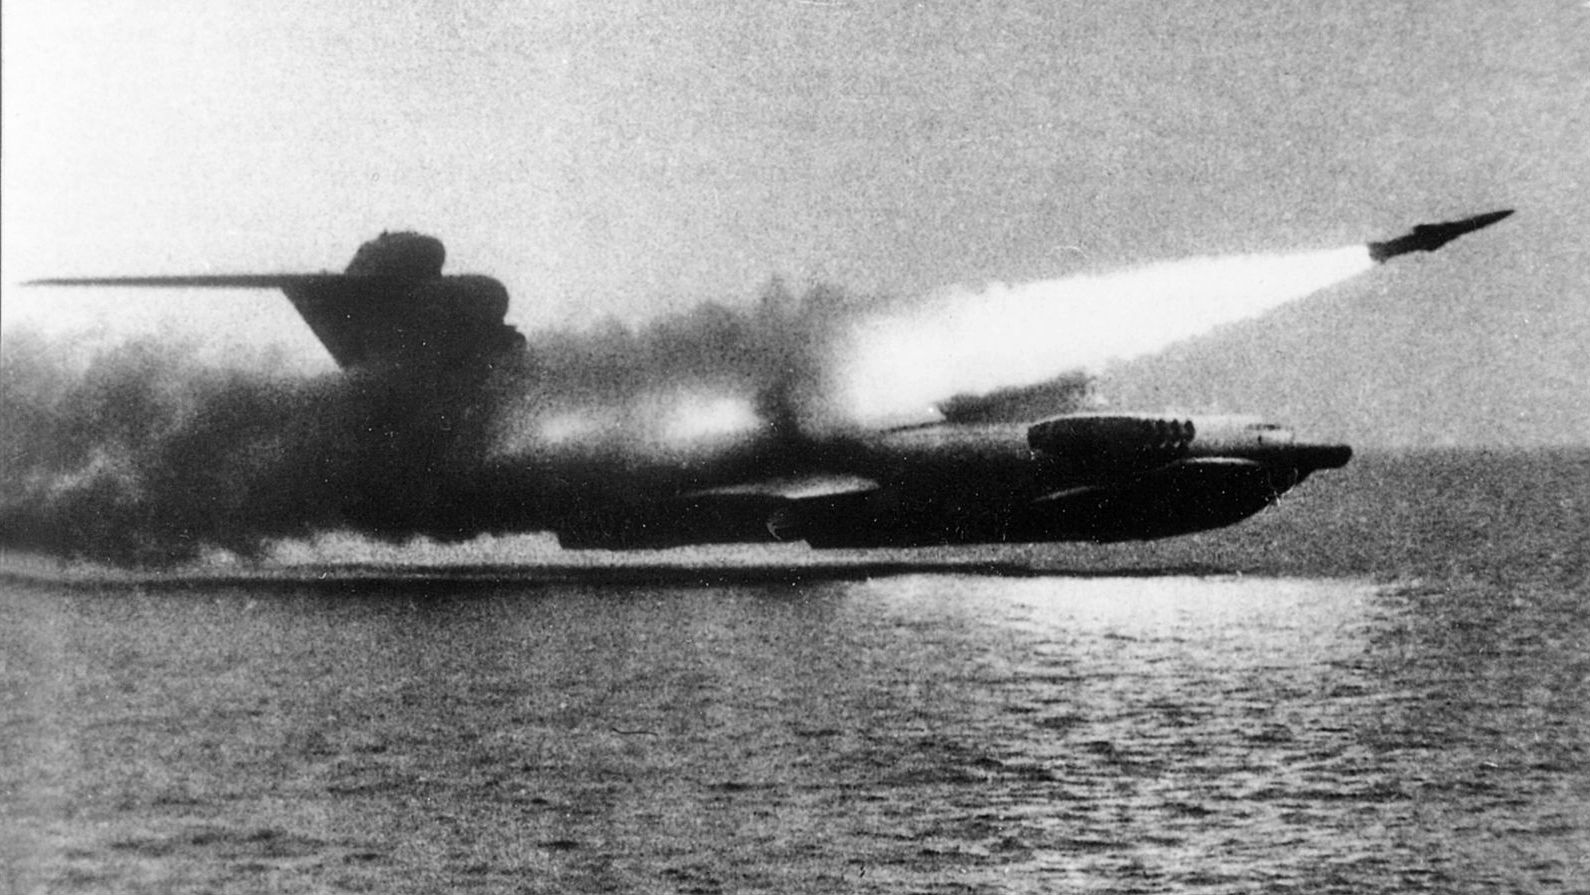 Monster Machines: This ‘Caspian Sea Monster’ Was A Giant Soviet Spruce Goose